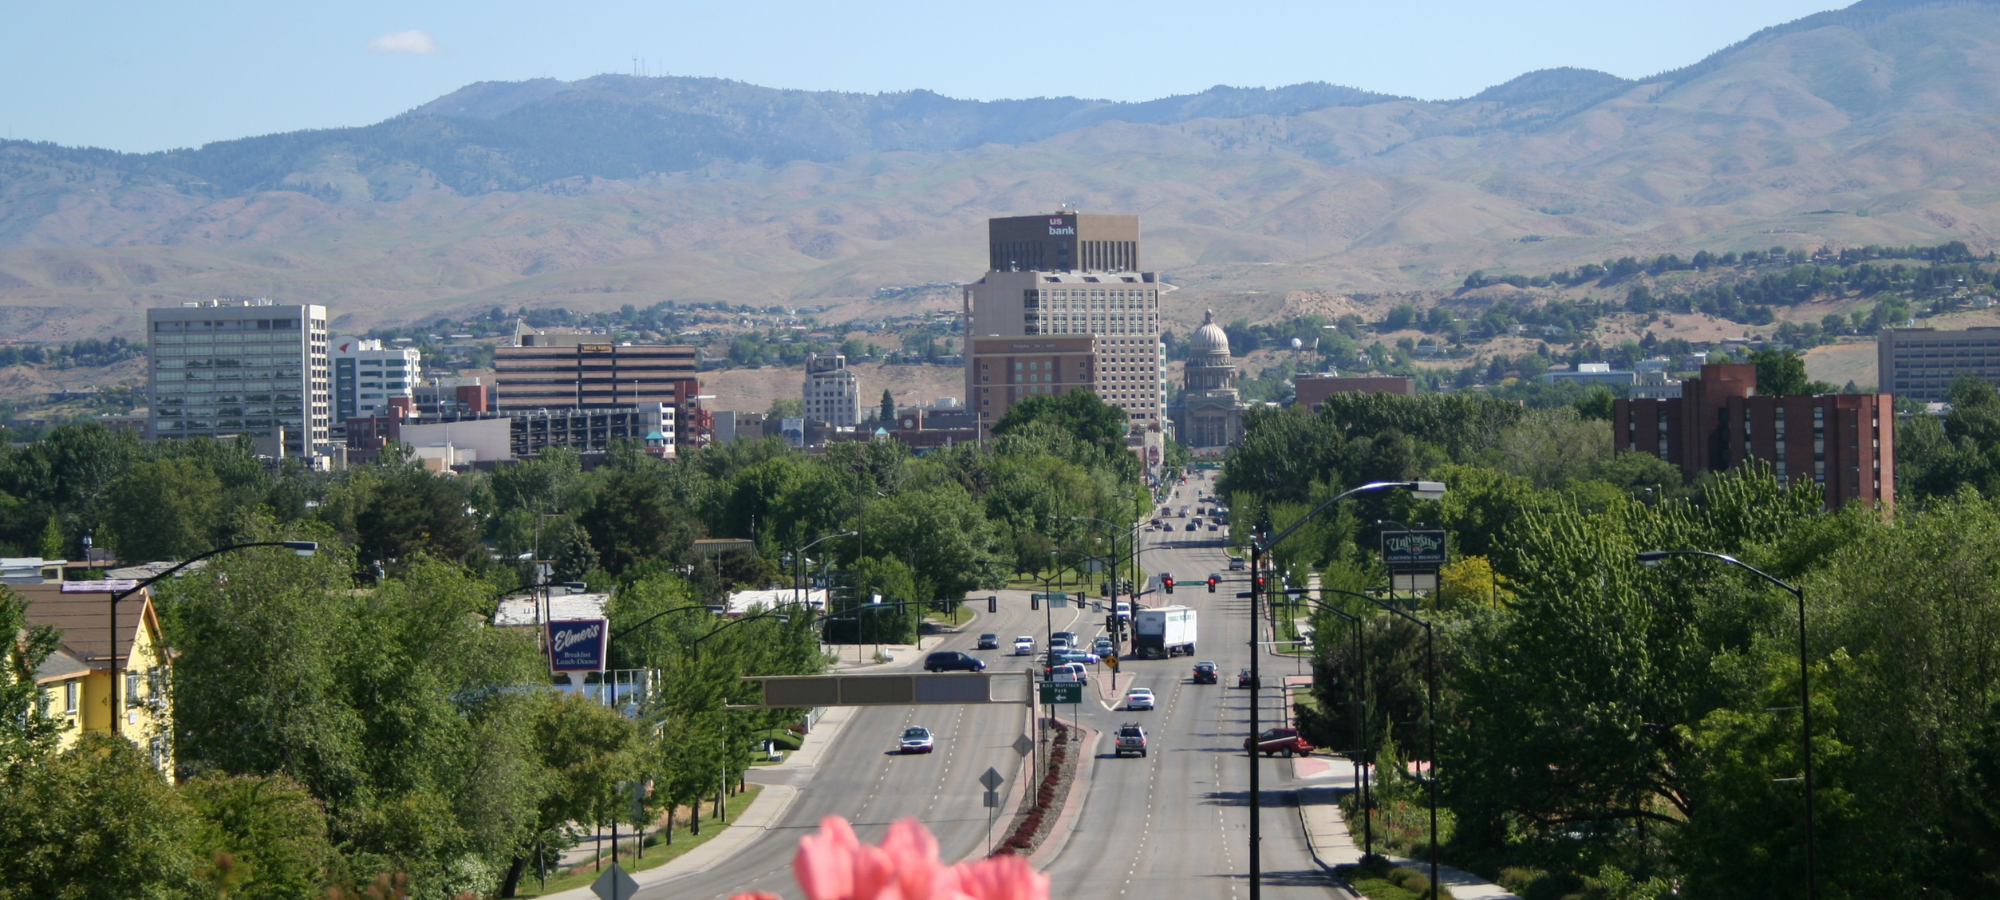 Capitol Boulevard in Downtown Boise, Capitol building